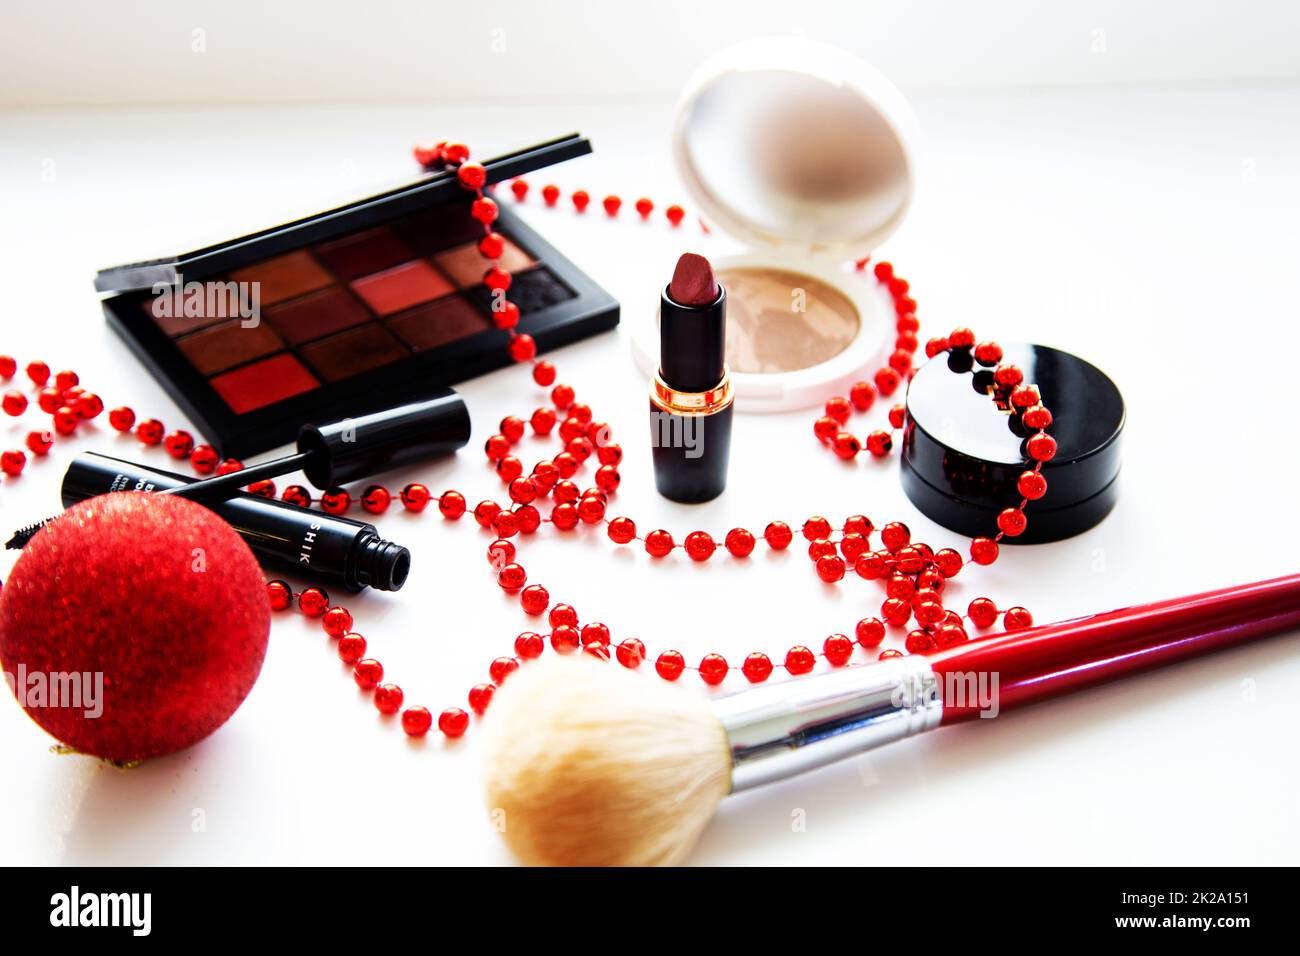 Powder and bronzer, eye shadow, lipstick, blush and brush of different brand brands lie on a white background surrounded by red Christmas balls. Stock Photo